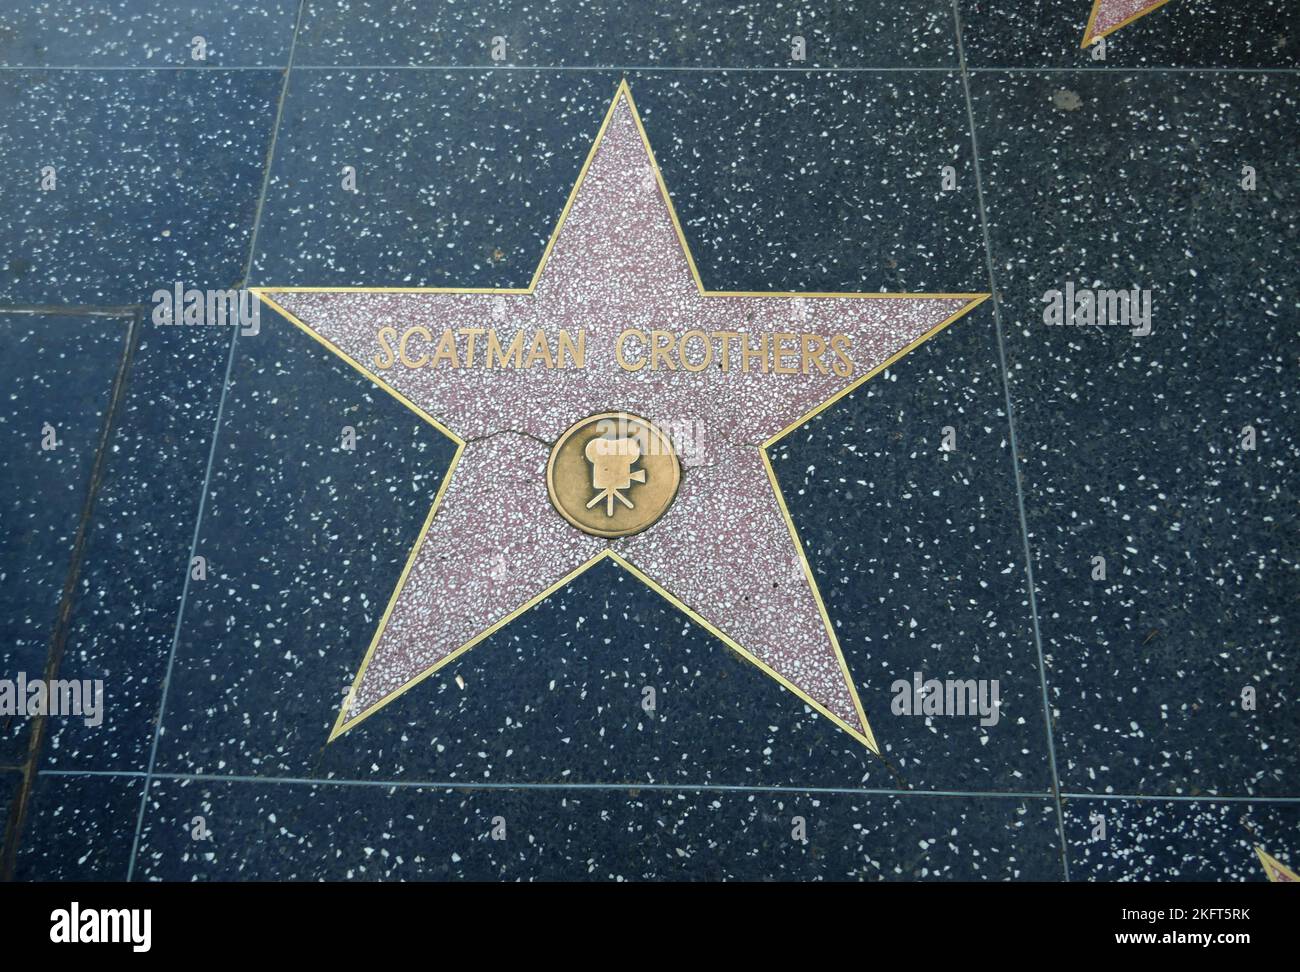 Los Angeles, California, USA 19th November 2022 Actor Scatman Crothers Hollywood Walk of Fame Star on November 19, 2022 in Los Angeles, California, USA. Photo by Barry King/Alamy Stock Photo Stock Photo